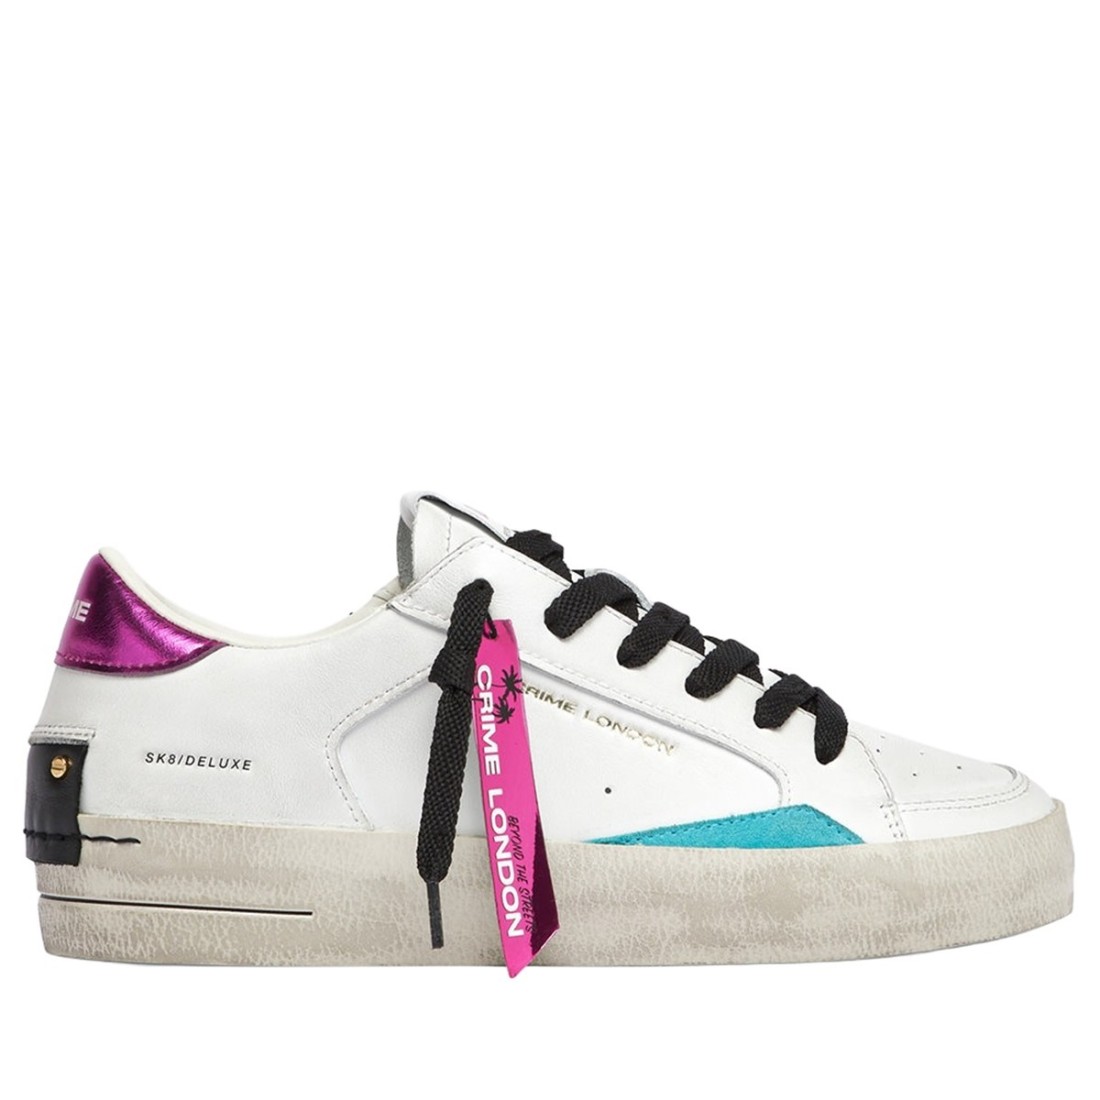 Image of CRIME LONDON - Sneakers SK8 Deluxe - Colore: Bianc